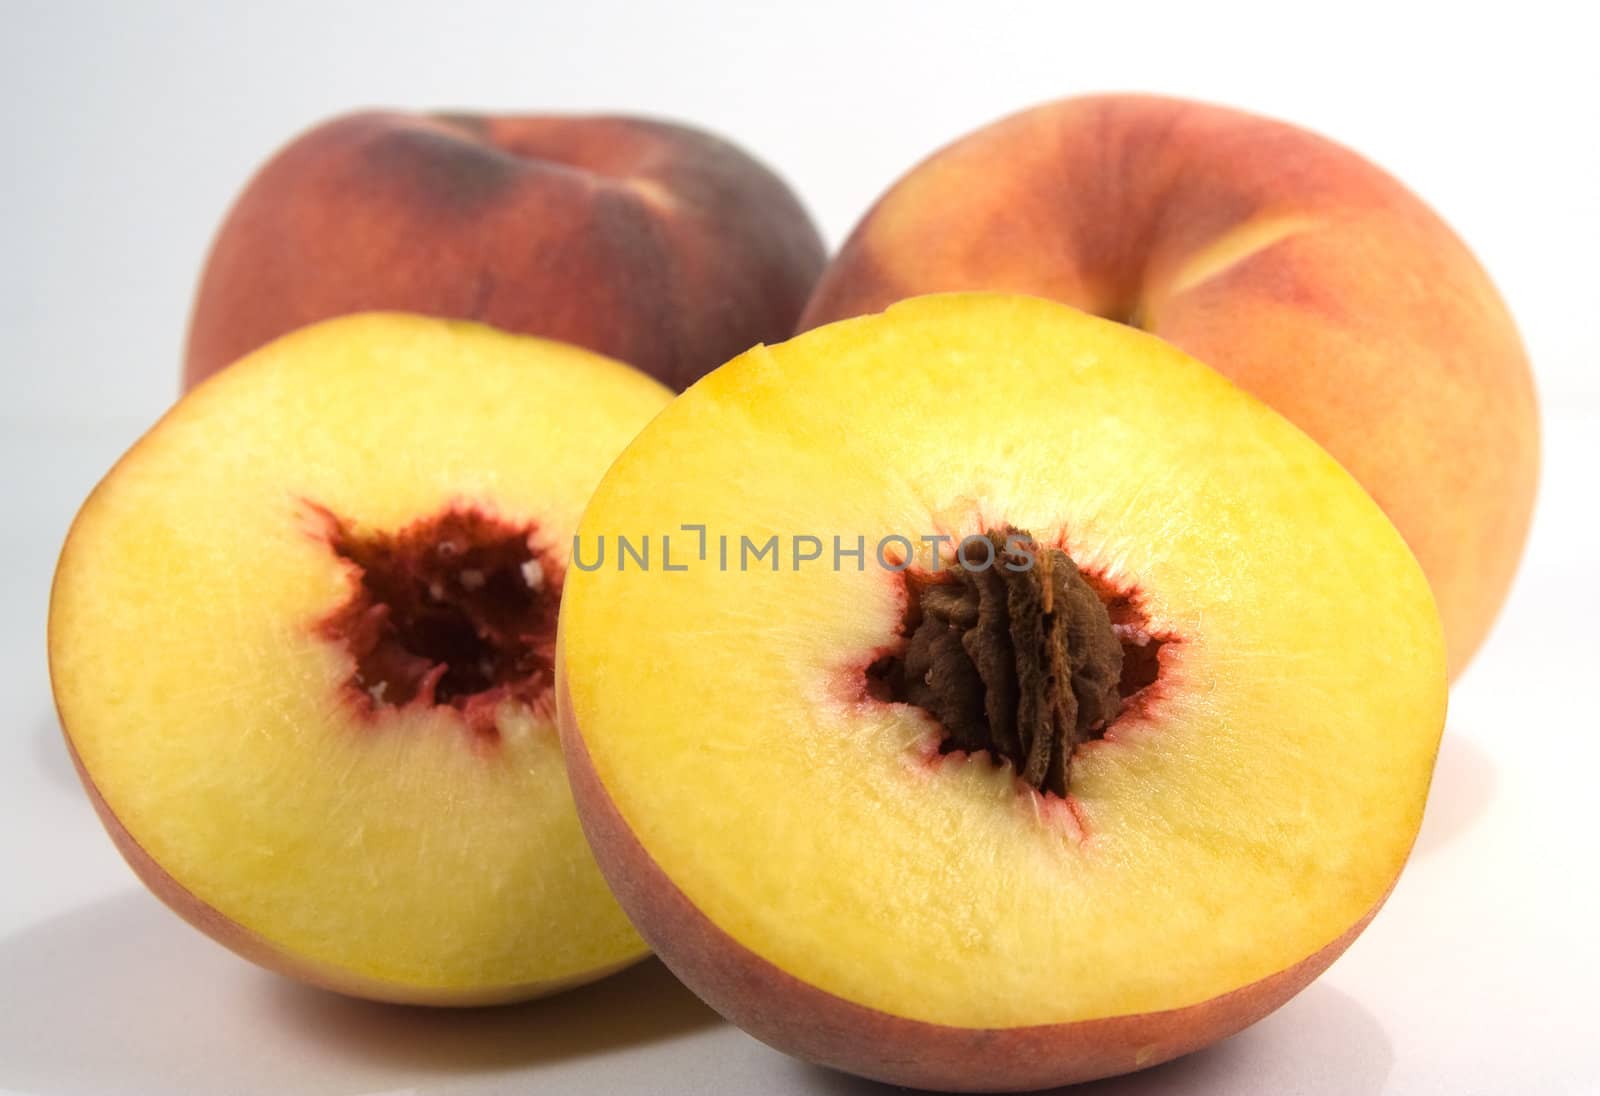 Peach with seed foreground. Shalow depth of field. by serpl